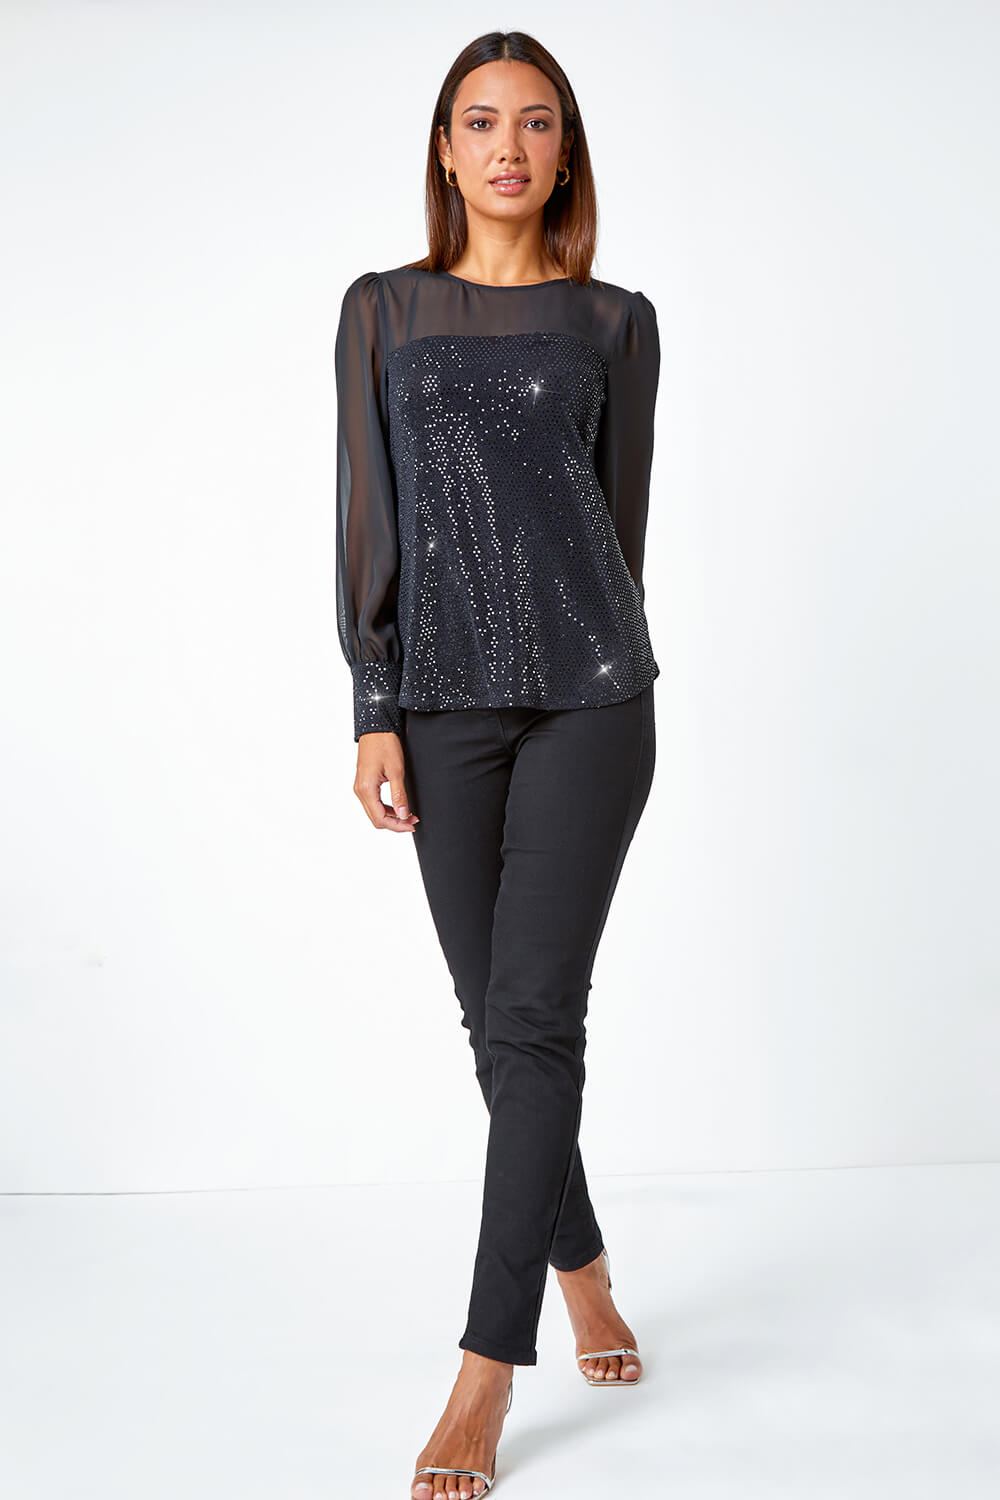 Black Sequin Chiffon Sleeve Stretch Top, Image 2 of 5